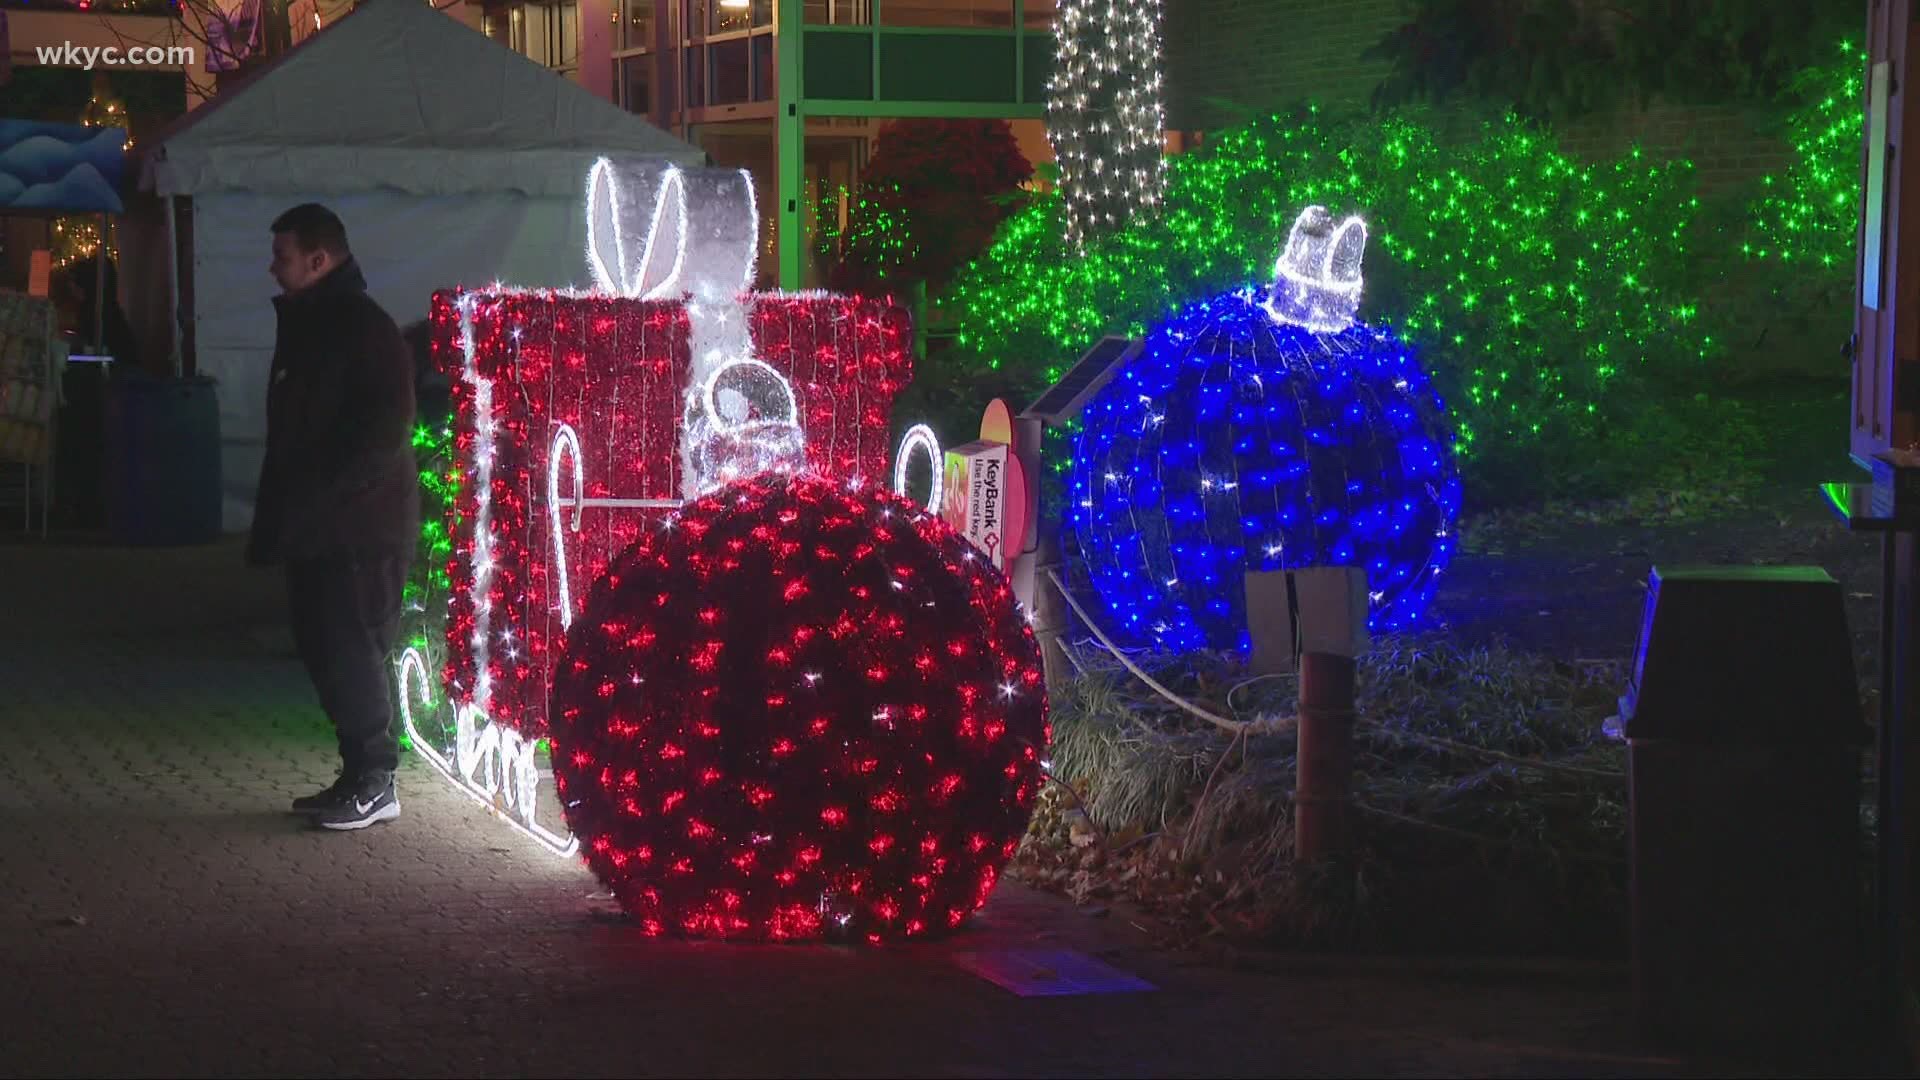 Yes! It's back! The Cleveland Zoo's popular 'Wild Winter Lights' event is returning for the 2020 holiday season. It will feature some all-new displays.